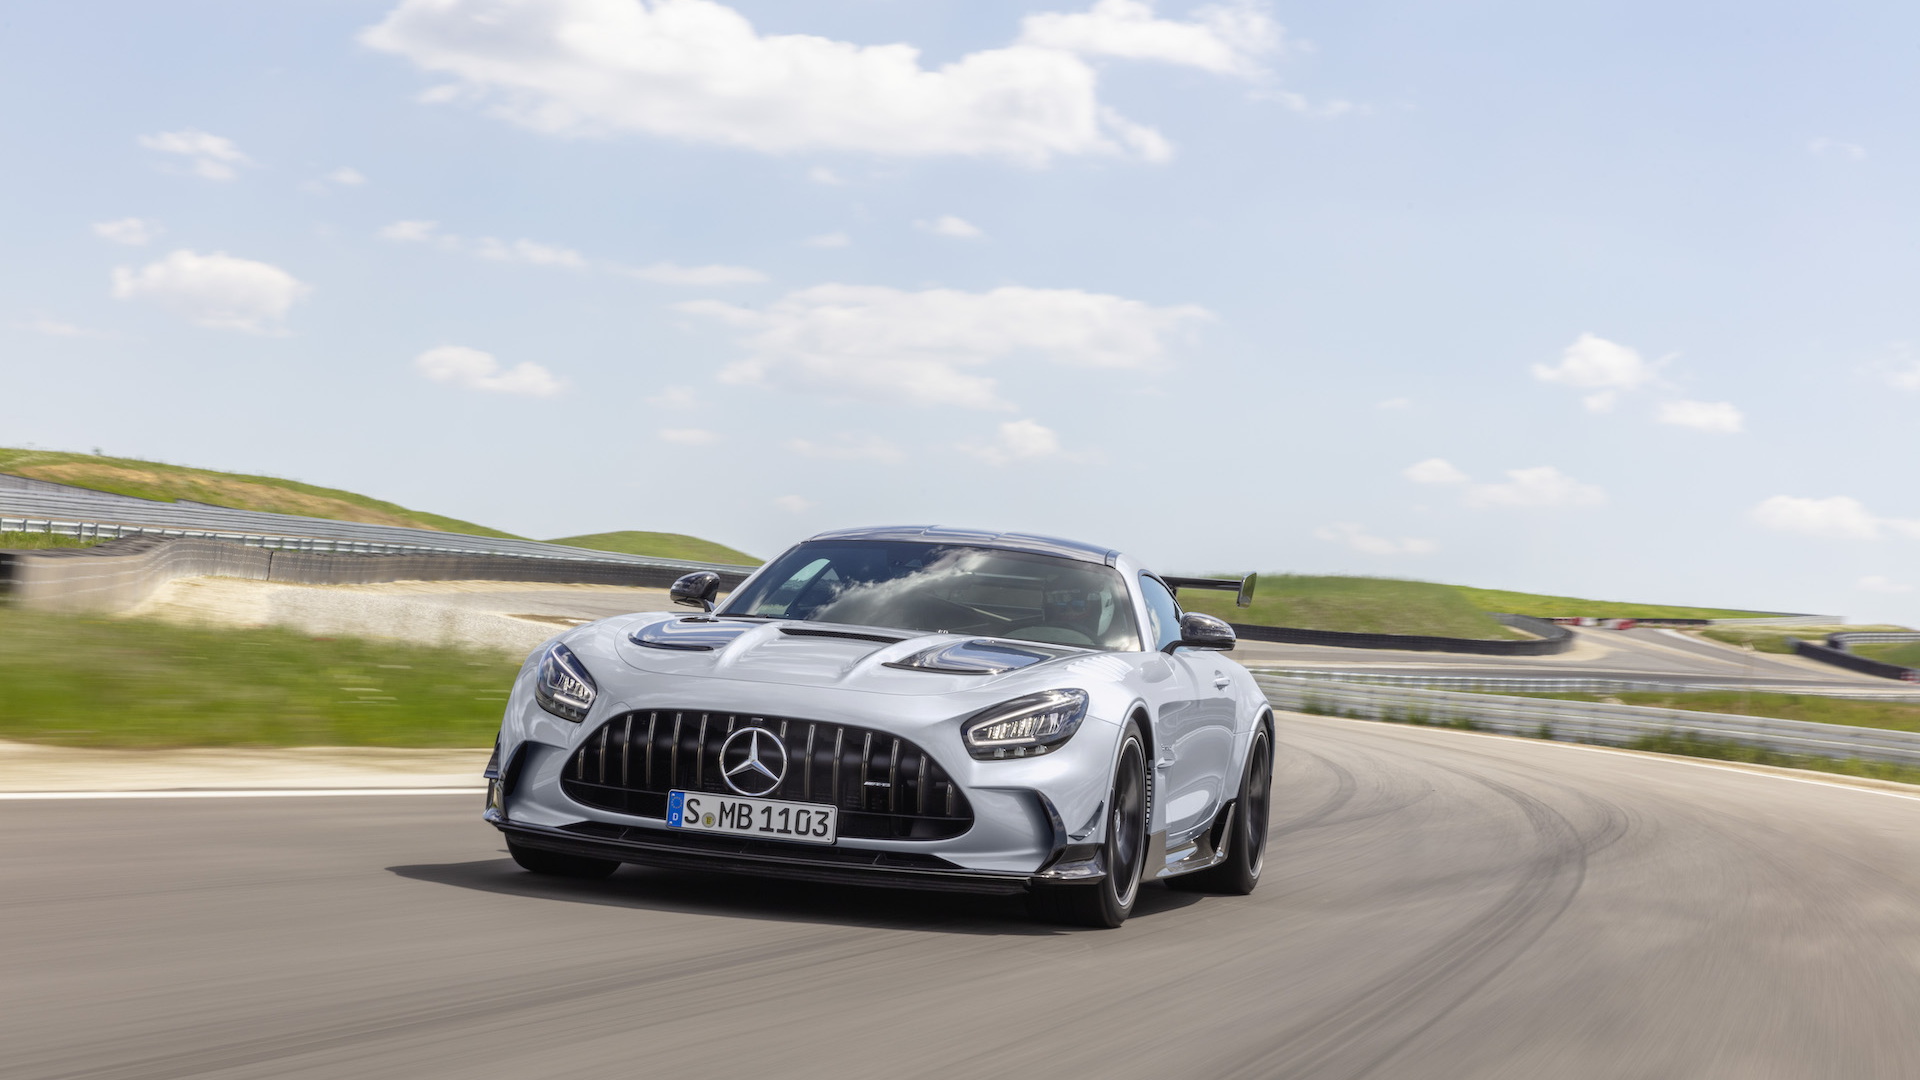 2021 Mercedes Amg Gt Black Series Revealed With 720 Hp And